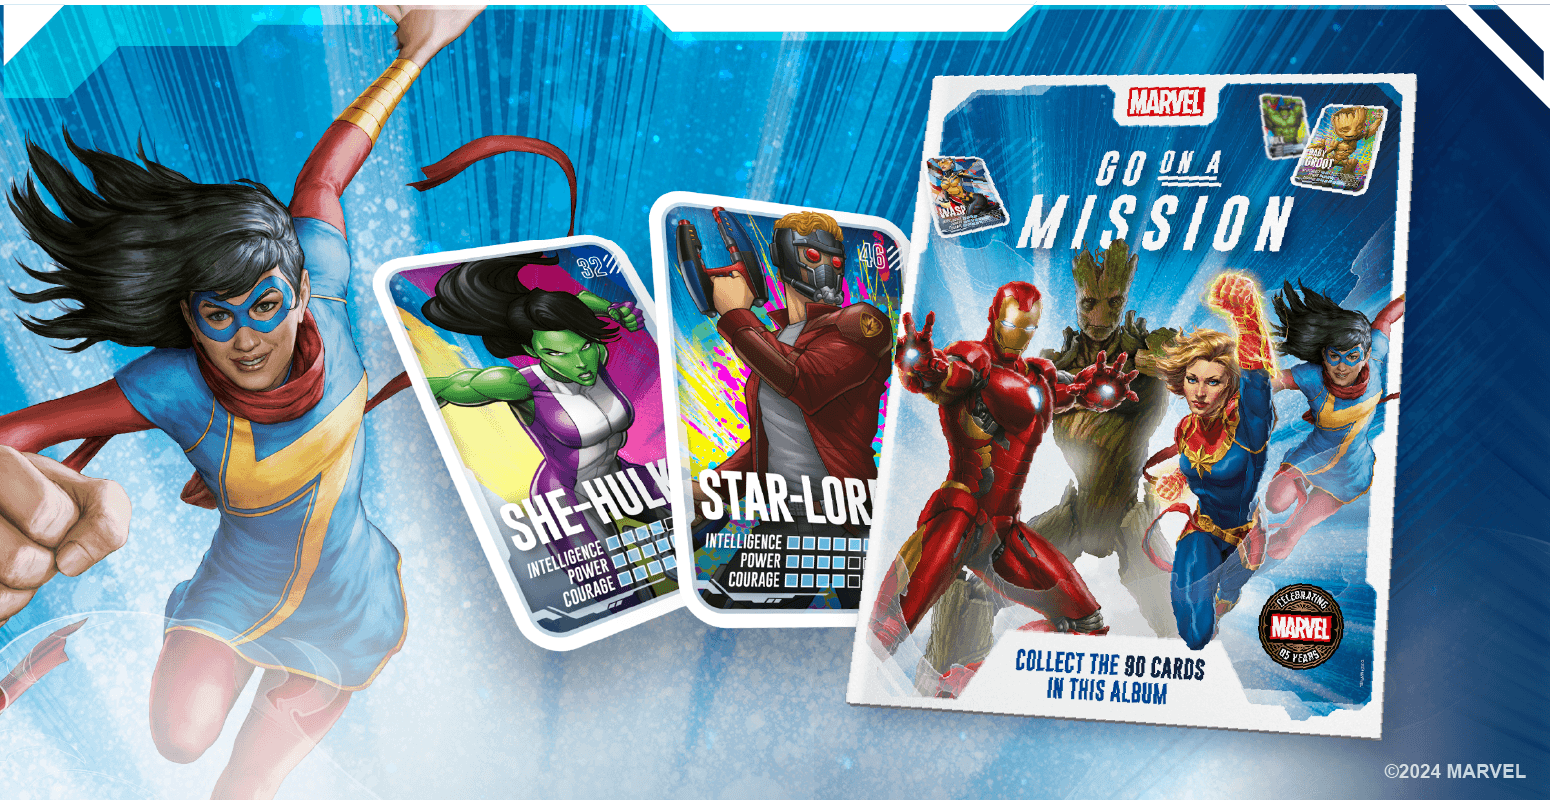 Marvel "Go on a Mission" Collectors Album and two trading cards featuring She-Hulk and Star-Lord.